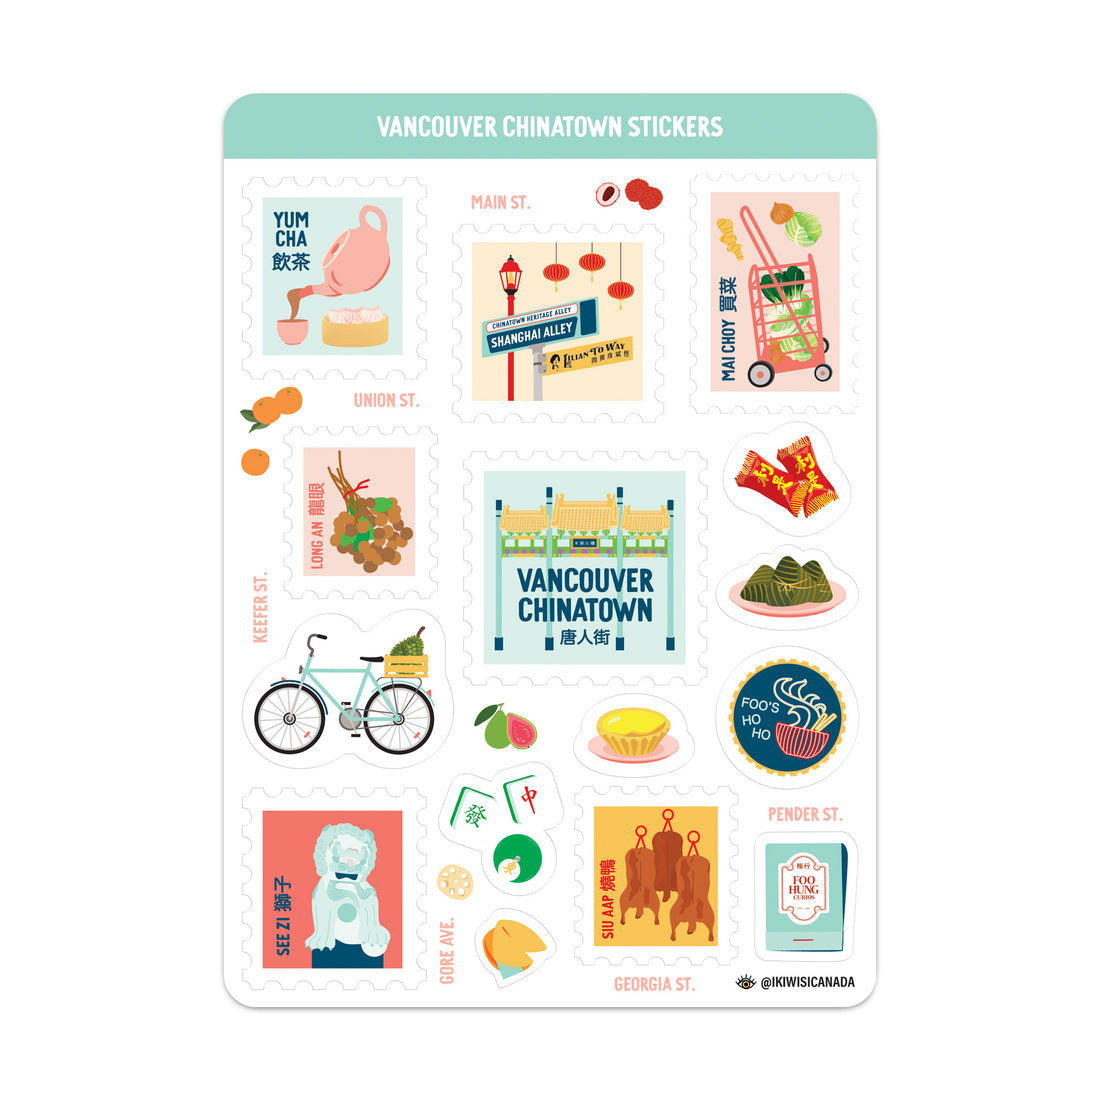 Vancouver Chinatown sticker sheet by I&